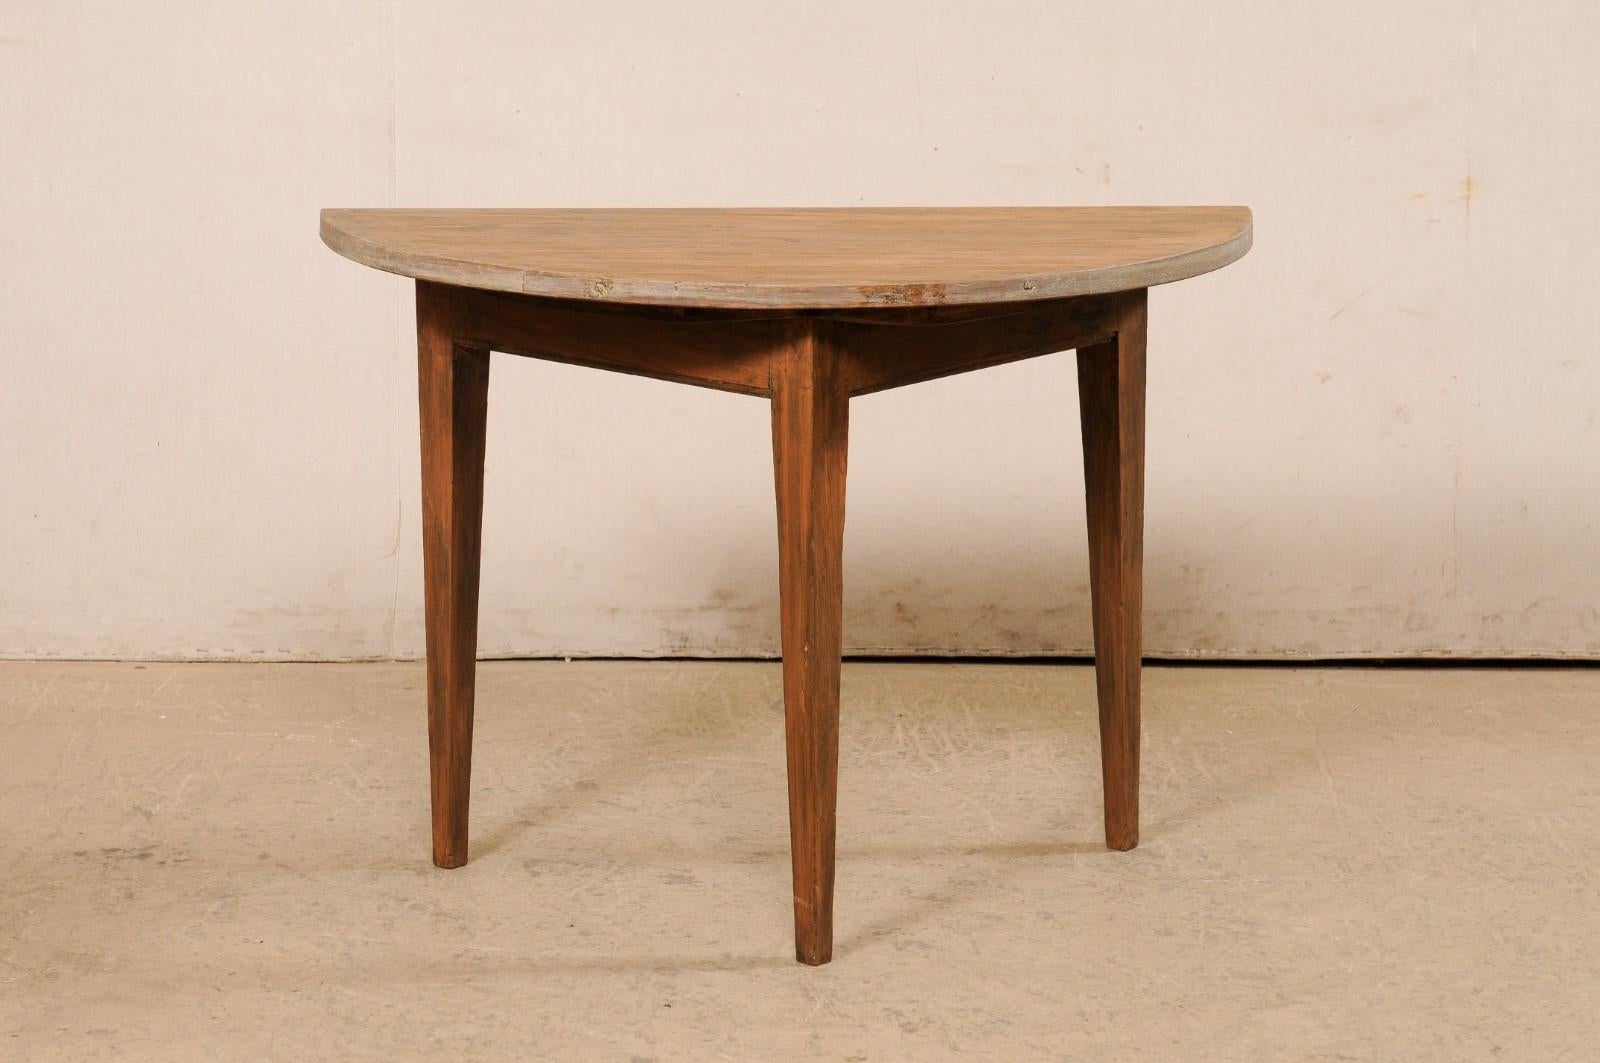 A Swedish single wooden demi-lune table from the 19th century. This antique table from Sweden features a semi-circular, or half moon top, over a triangular shaped apron. The skirt is clean and plain, and the piece is raised upon three squared legs